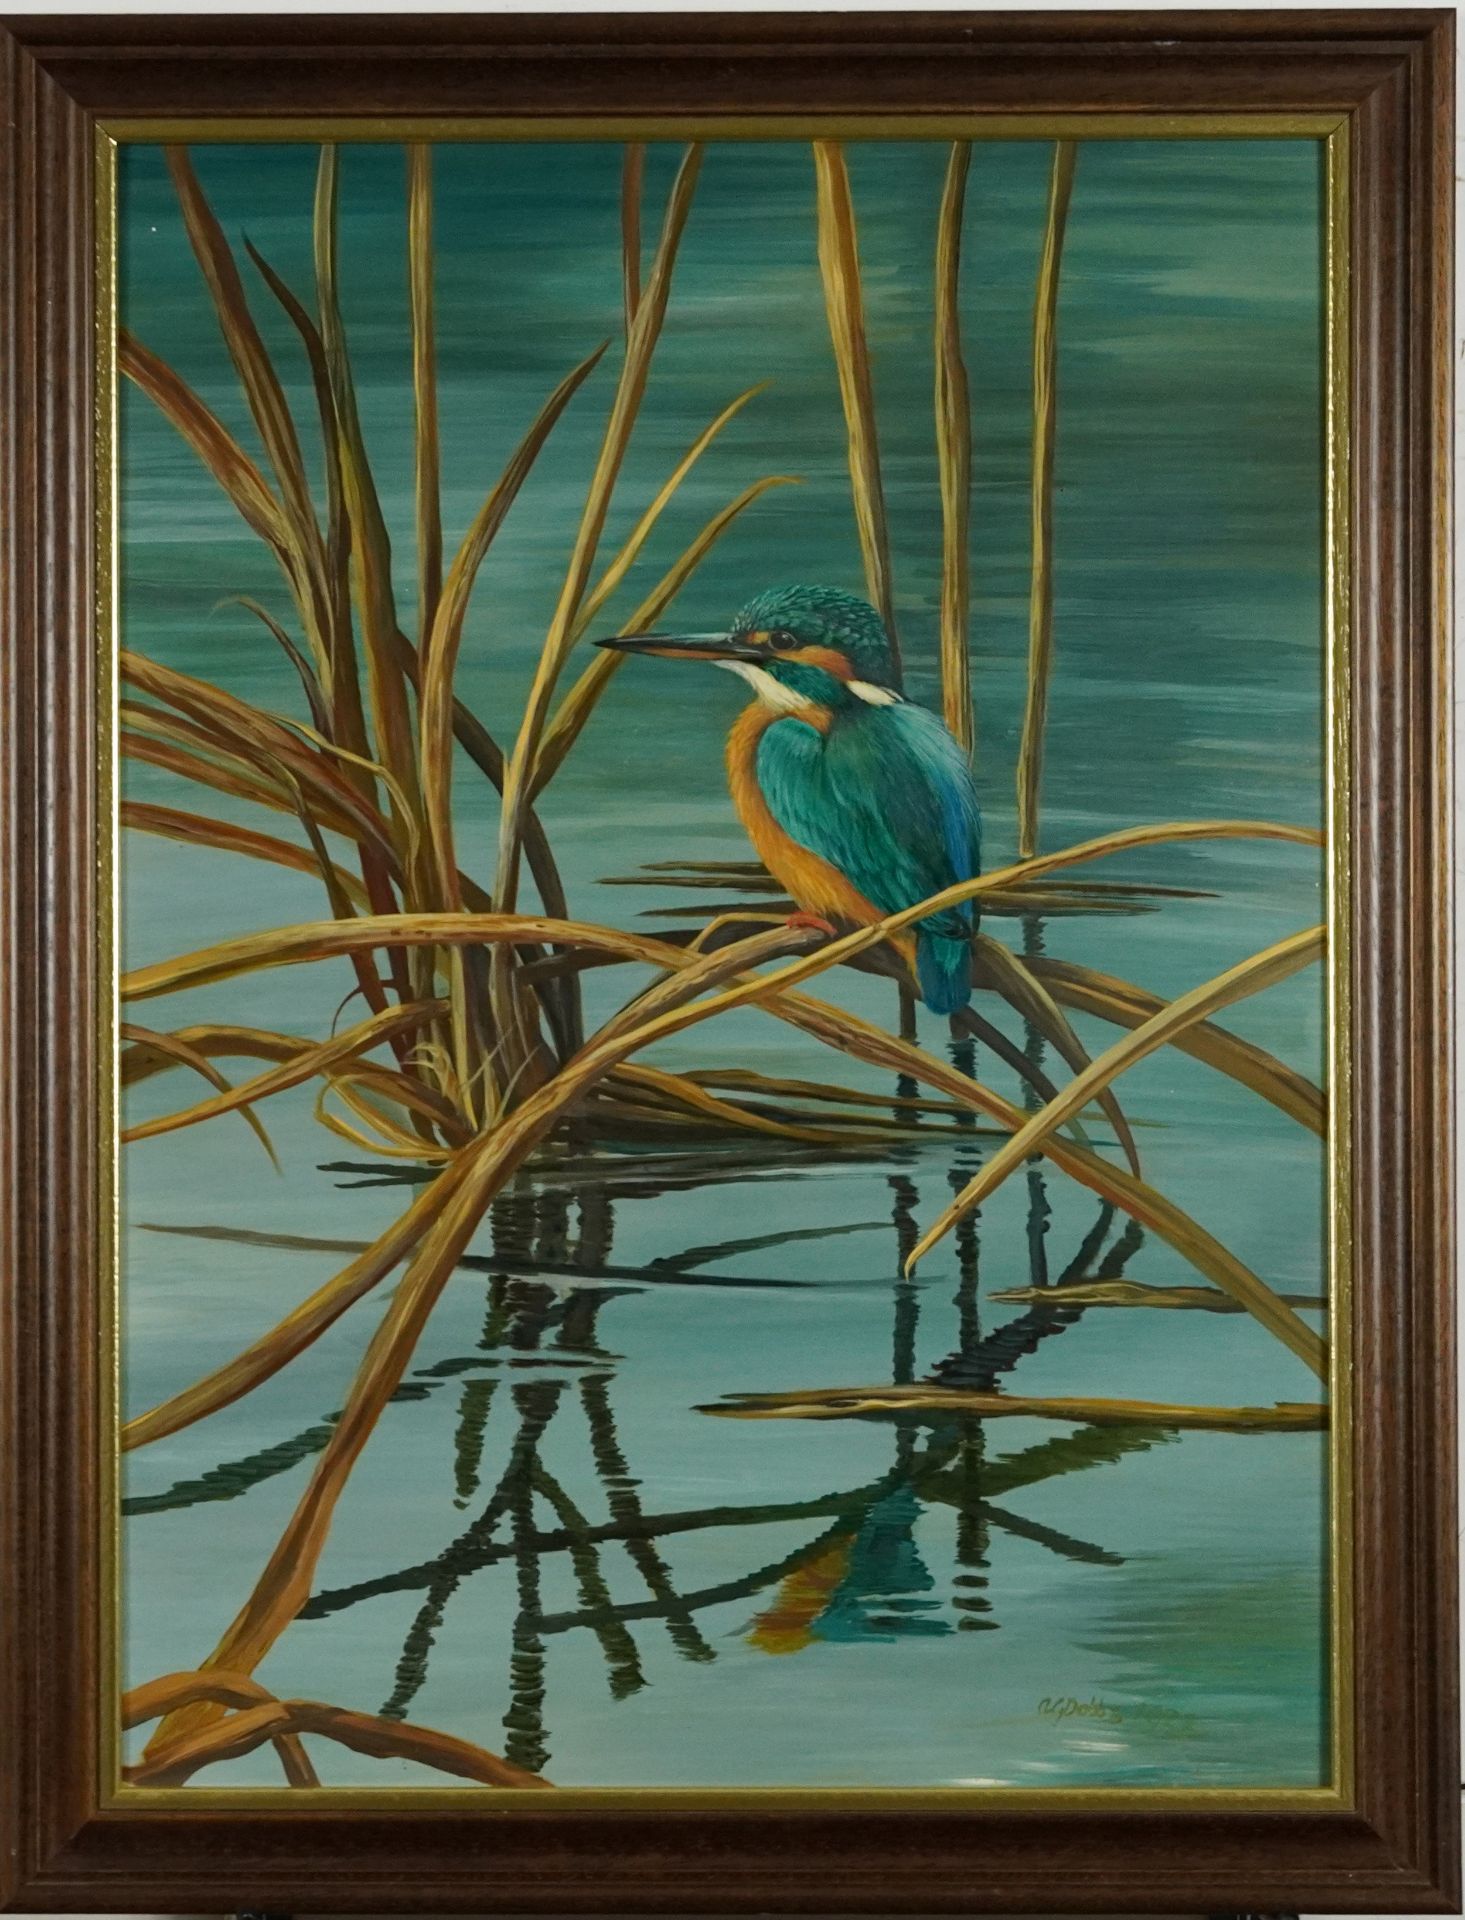 Kingfisher on reeds above water, oil on board, indistinctly signed, possibly ... Dobbs, mounted - Image 2 of 4